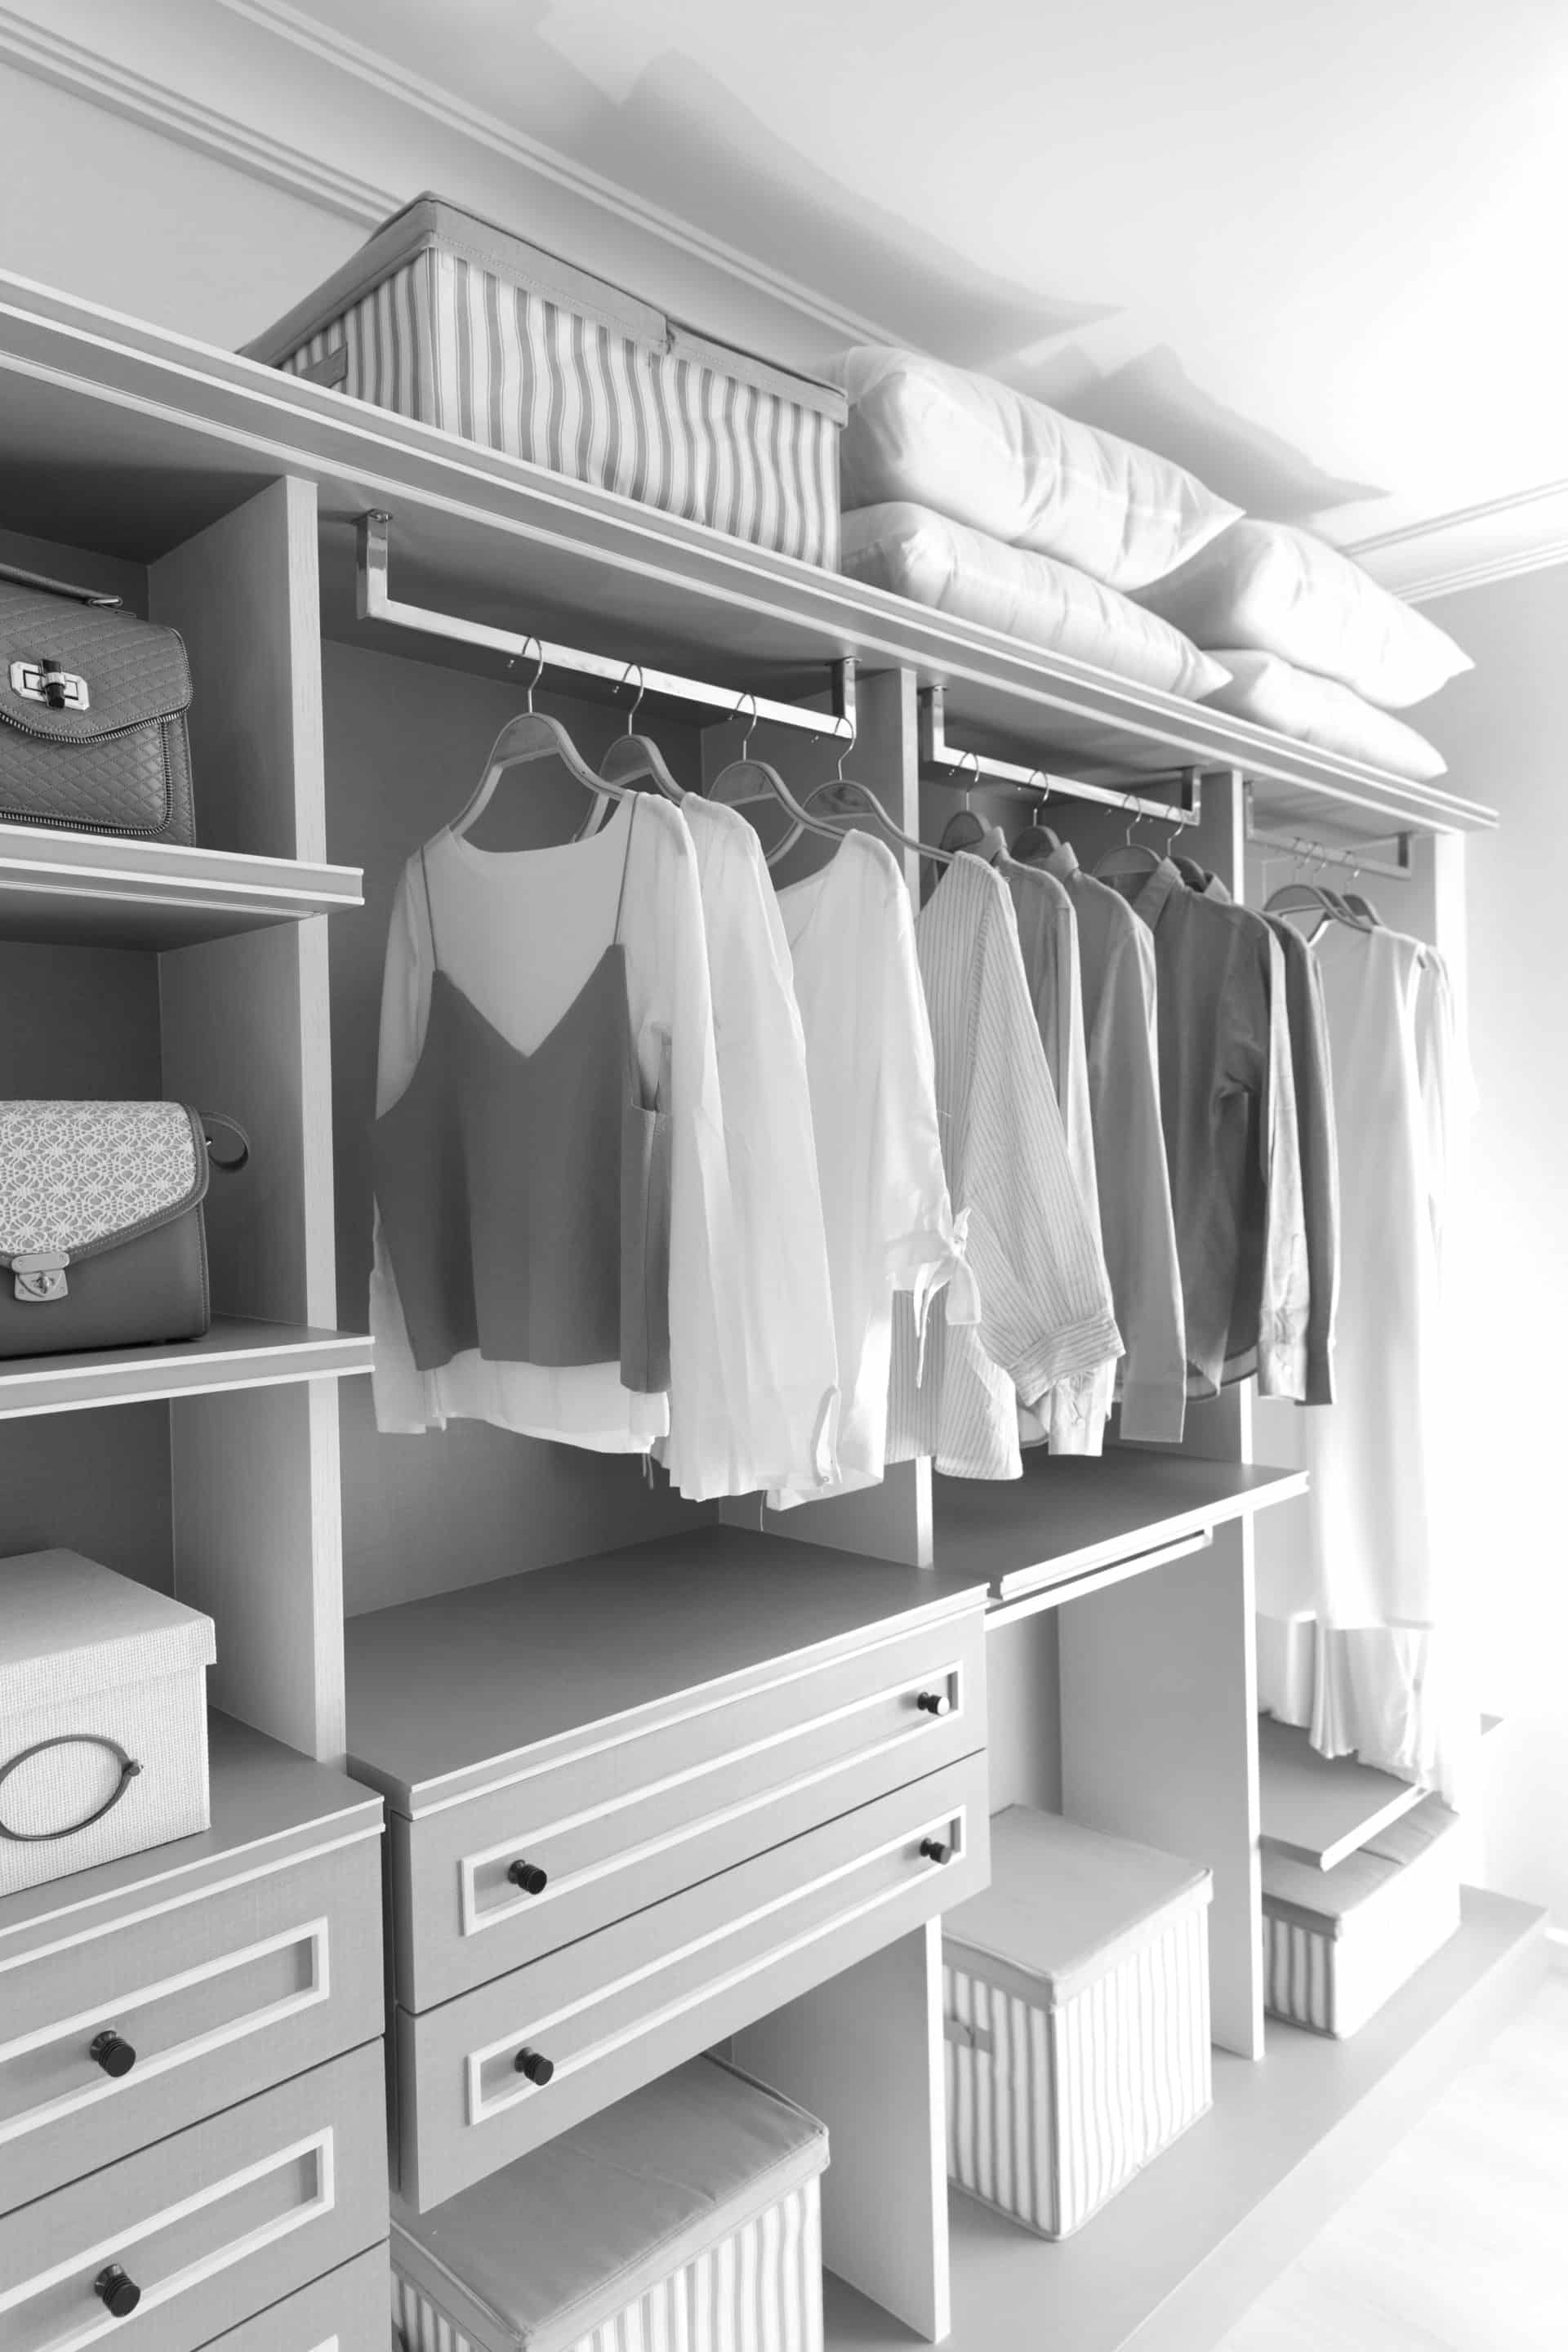 Wardrobes — Instyle Shower Screens & Wardrobes in Charmhaven, NSW